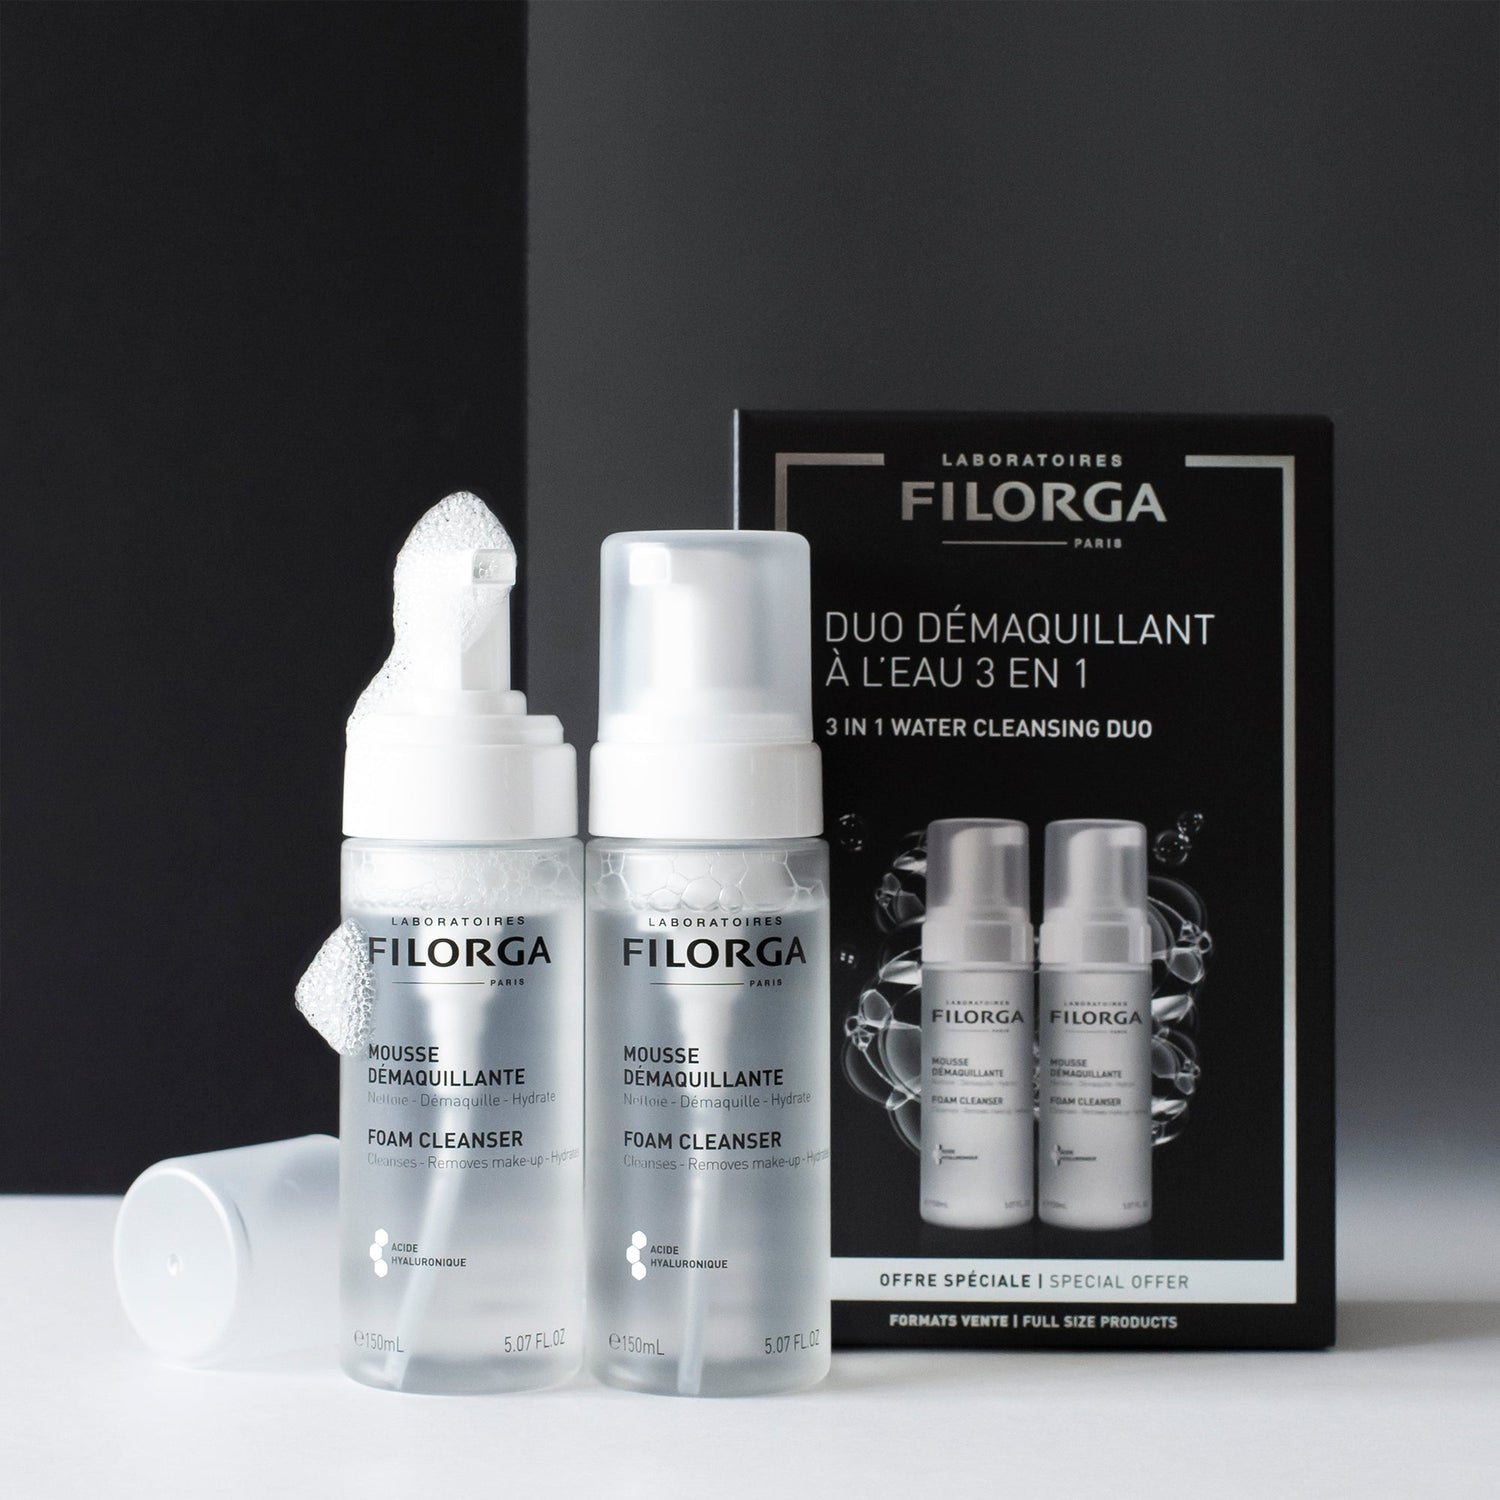 Open bottles of FILORGA FOAM CLEANSER DUO with box in the background